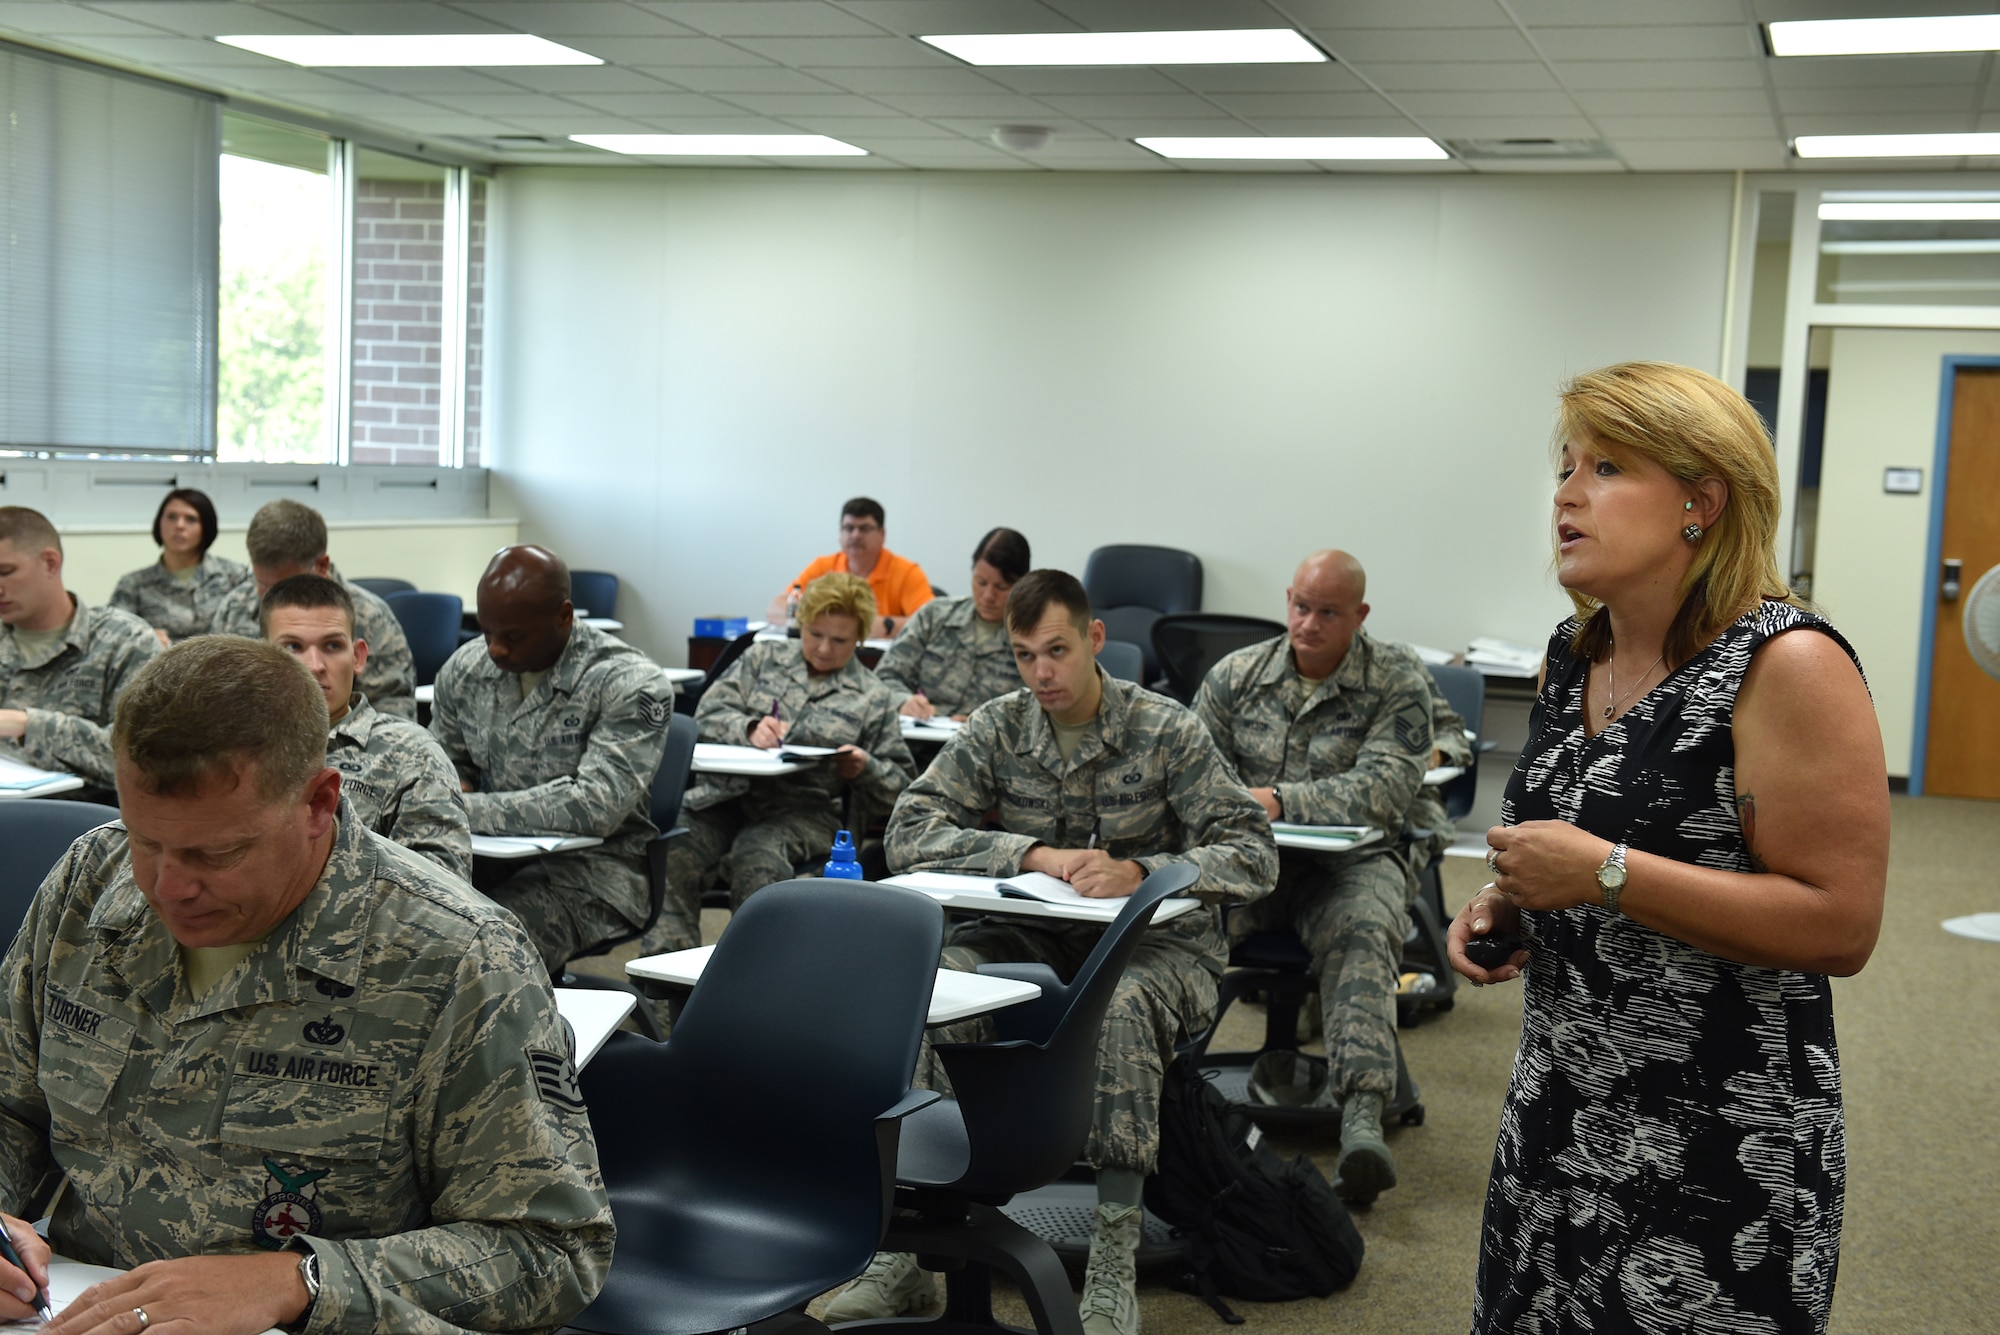 Tammie Smeltzer, professional continuing education manager, teaches a lesson on the different levels of learning to students enrolled in the Instructor Certification Program, July 20, 2016, at the I.G. Brown Training and Education Center in Louisville, Tenn. (U.S. Air National Guard photo by Master Sgt. Mike R. Smith)